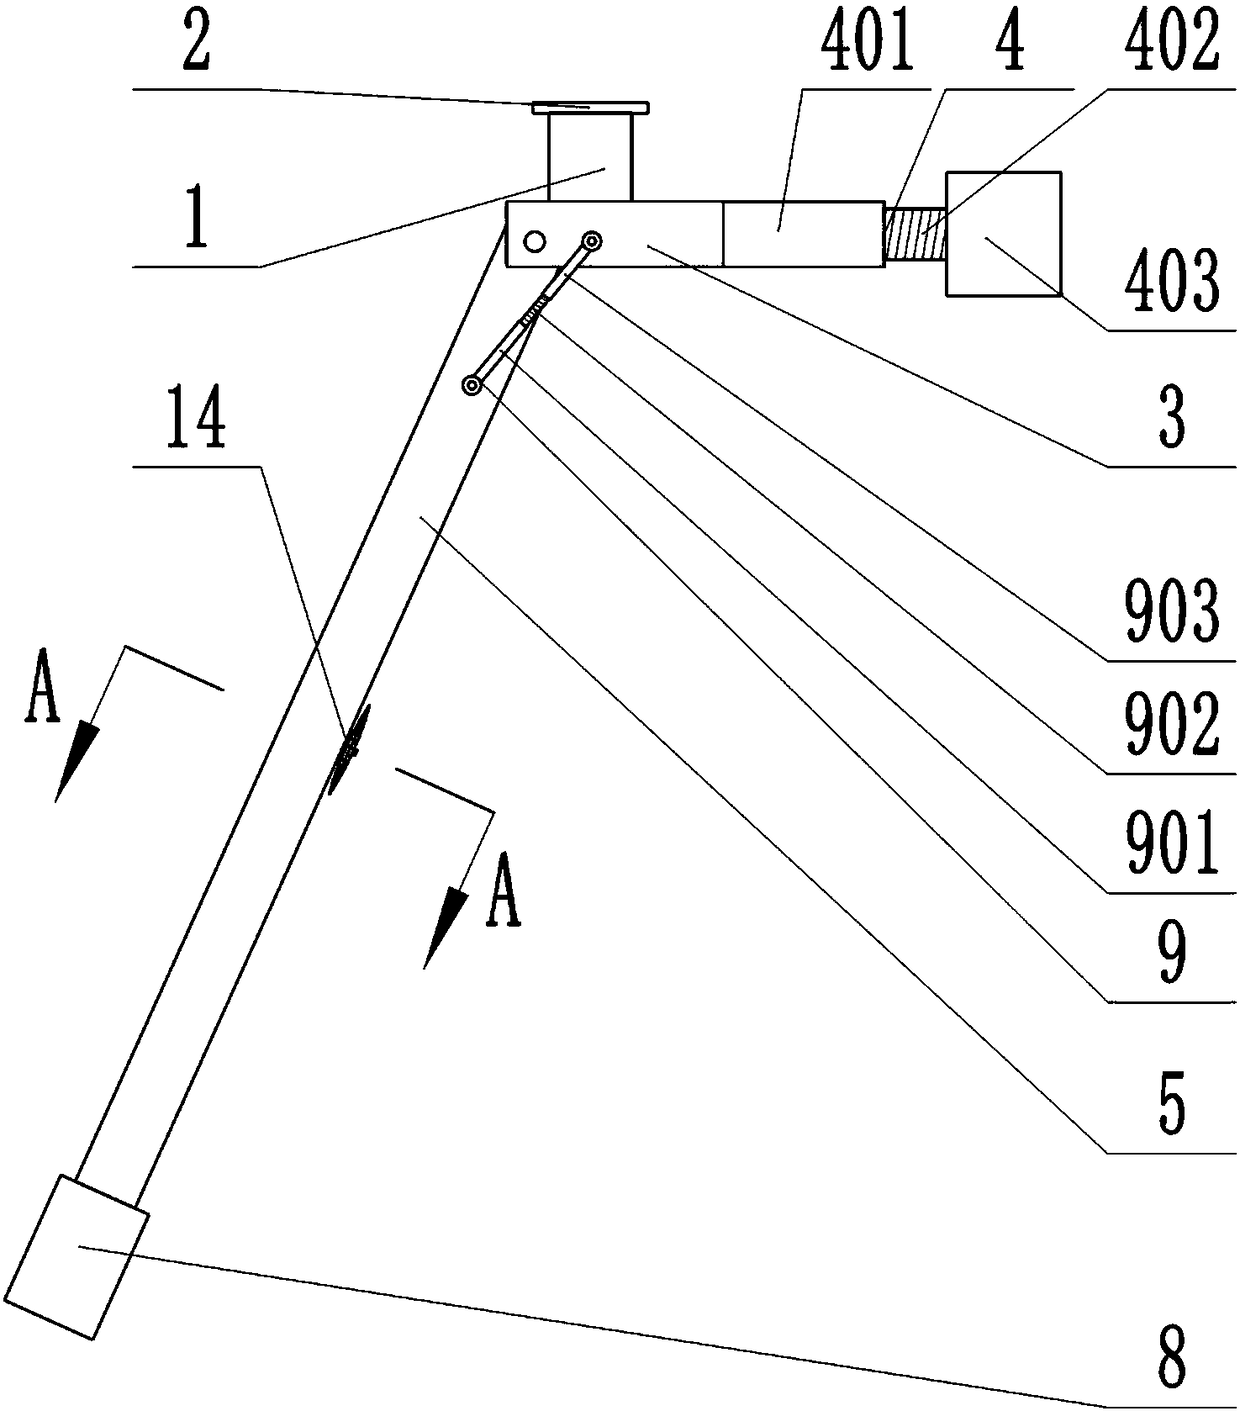 Angle-adjustable conical branches and leaves trimming device